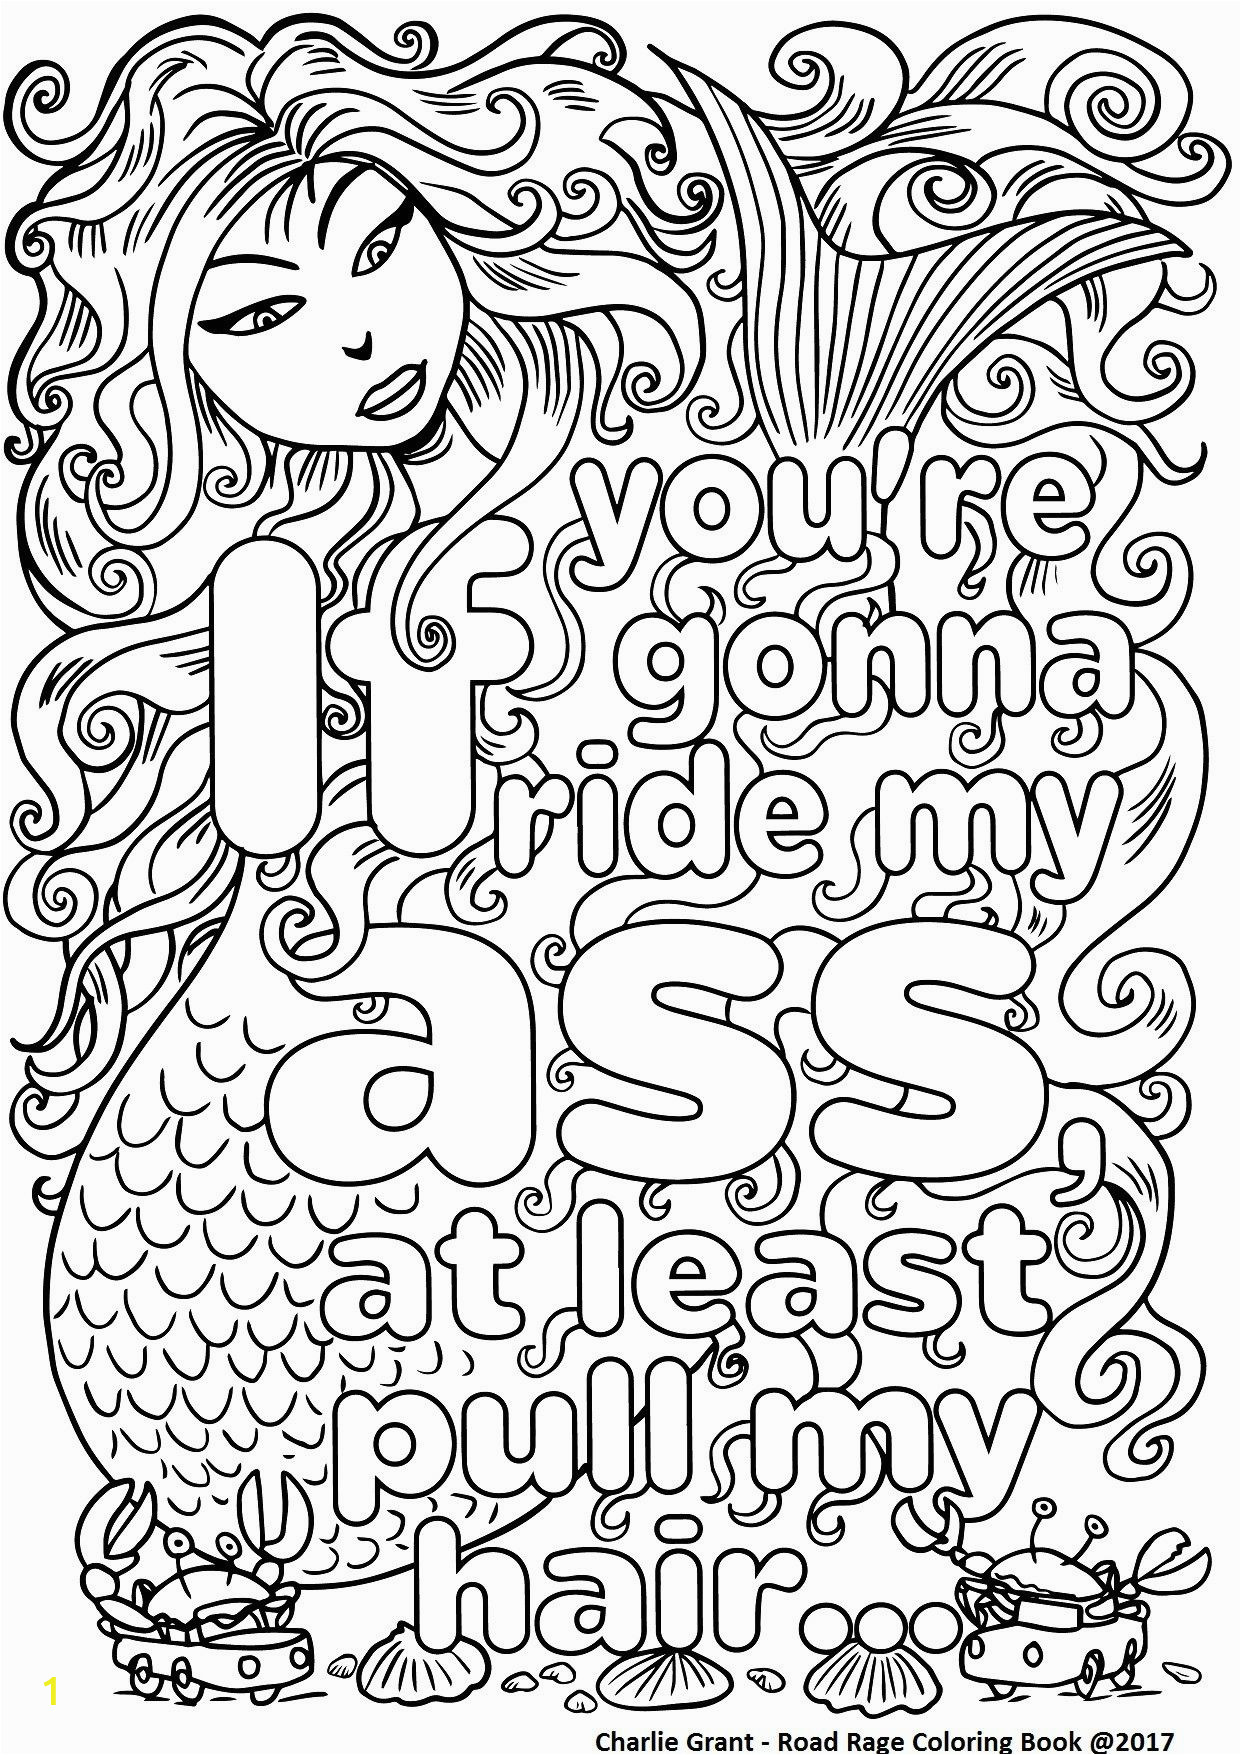 trippy curse words coloring pages for